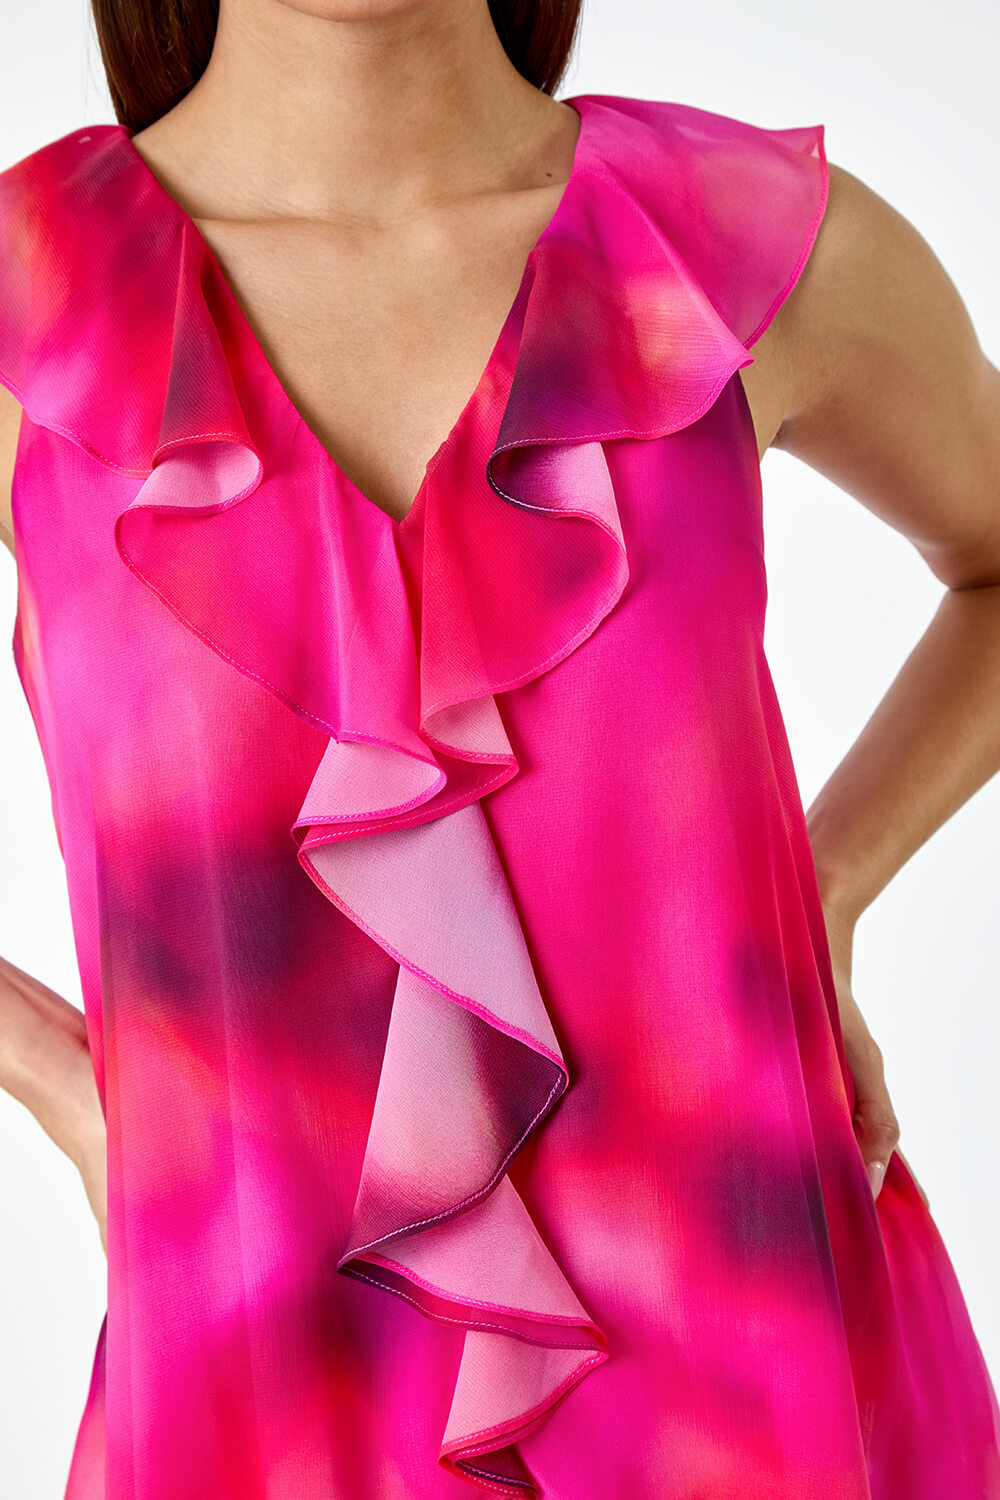 Fuchsia Ombre Print Ruffle Front Top, Image 5 of 5